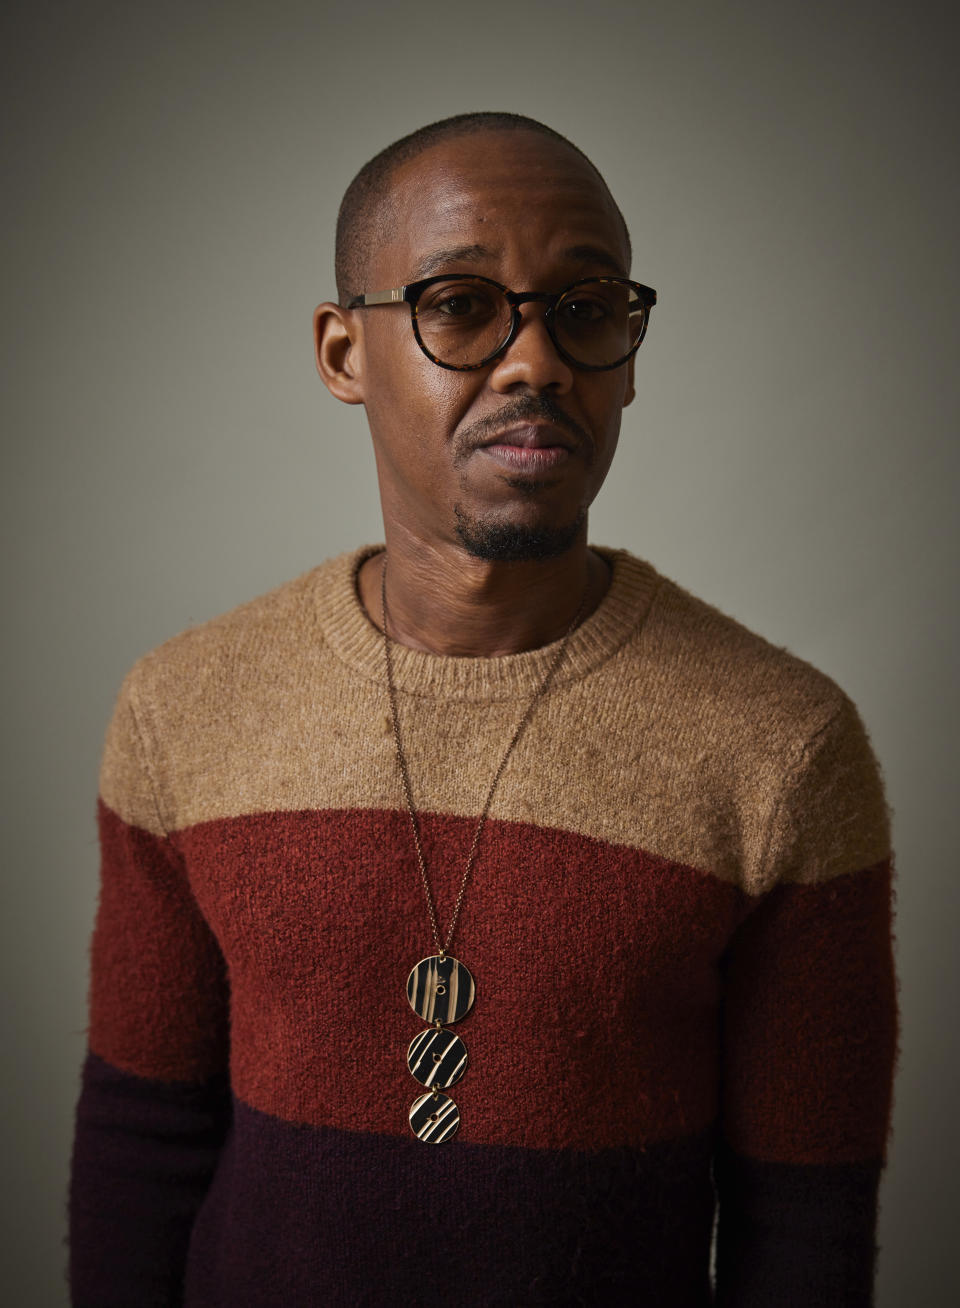 Louis Cato poses for a portrait on Friday, June 16, 2023, in New York. Cato's second album, “Reflections,” is out Aug. 11. (Photo by Matt Licari/Invision/AP)